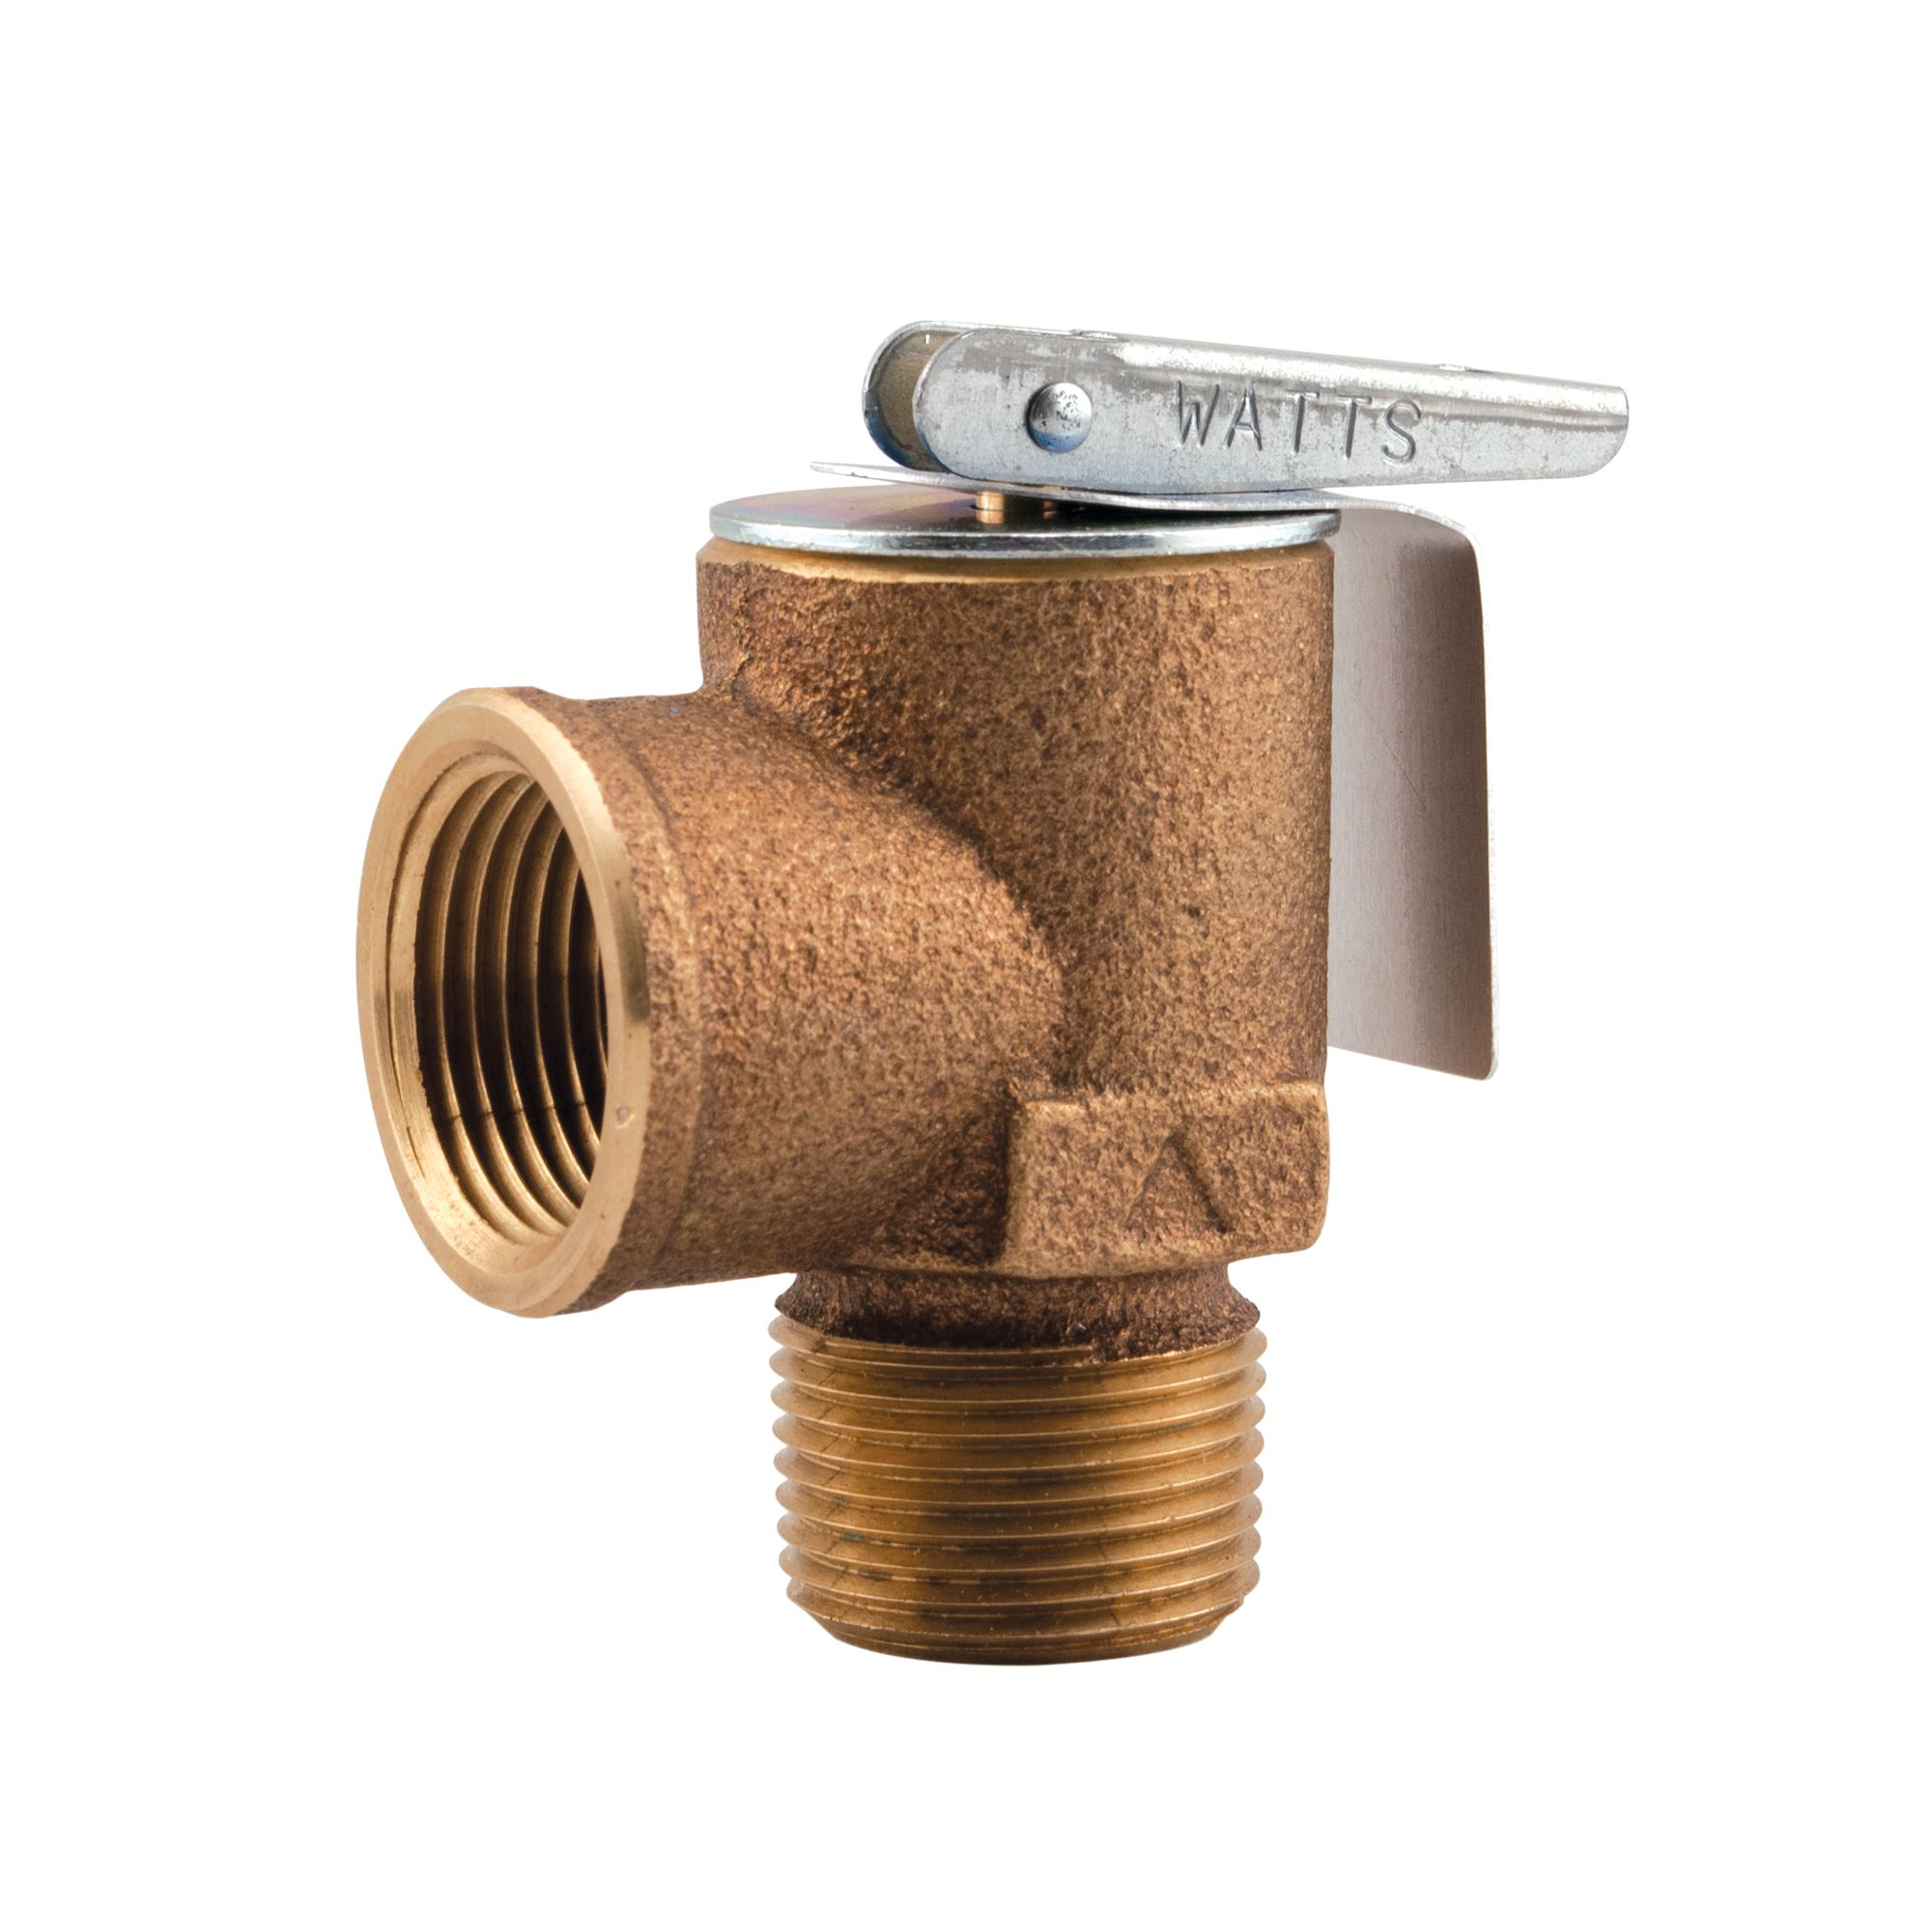 WATTS® 0342692 335 Pressure Safety Relief Valve, 3/4 in Nominal, MNPT End Style, 30 psi Pressure, Bronze Body, Domestic